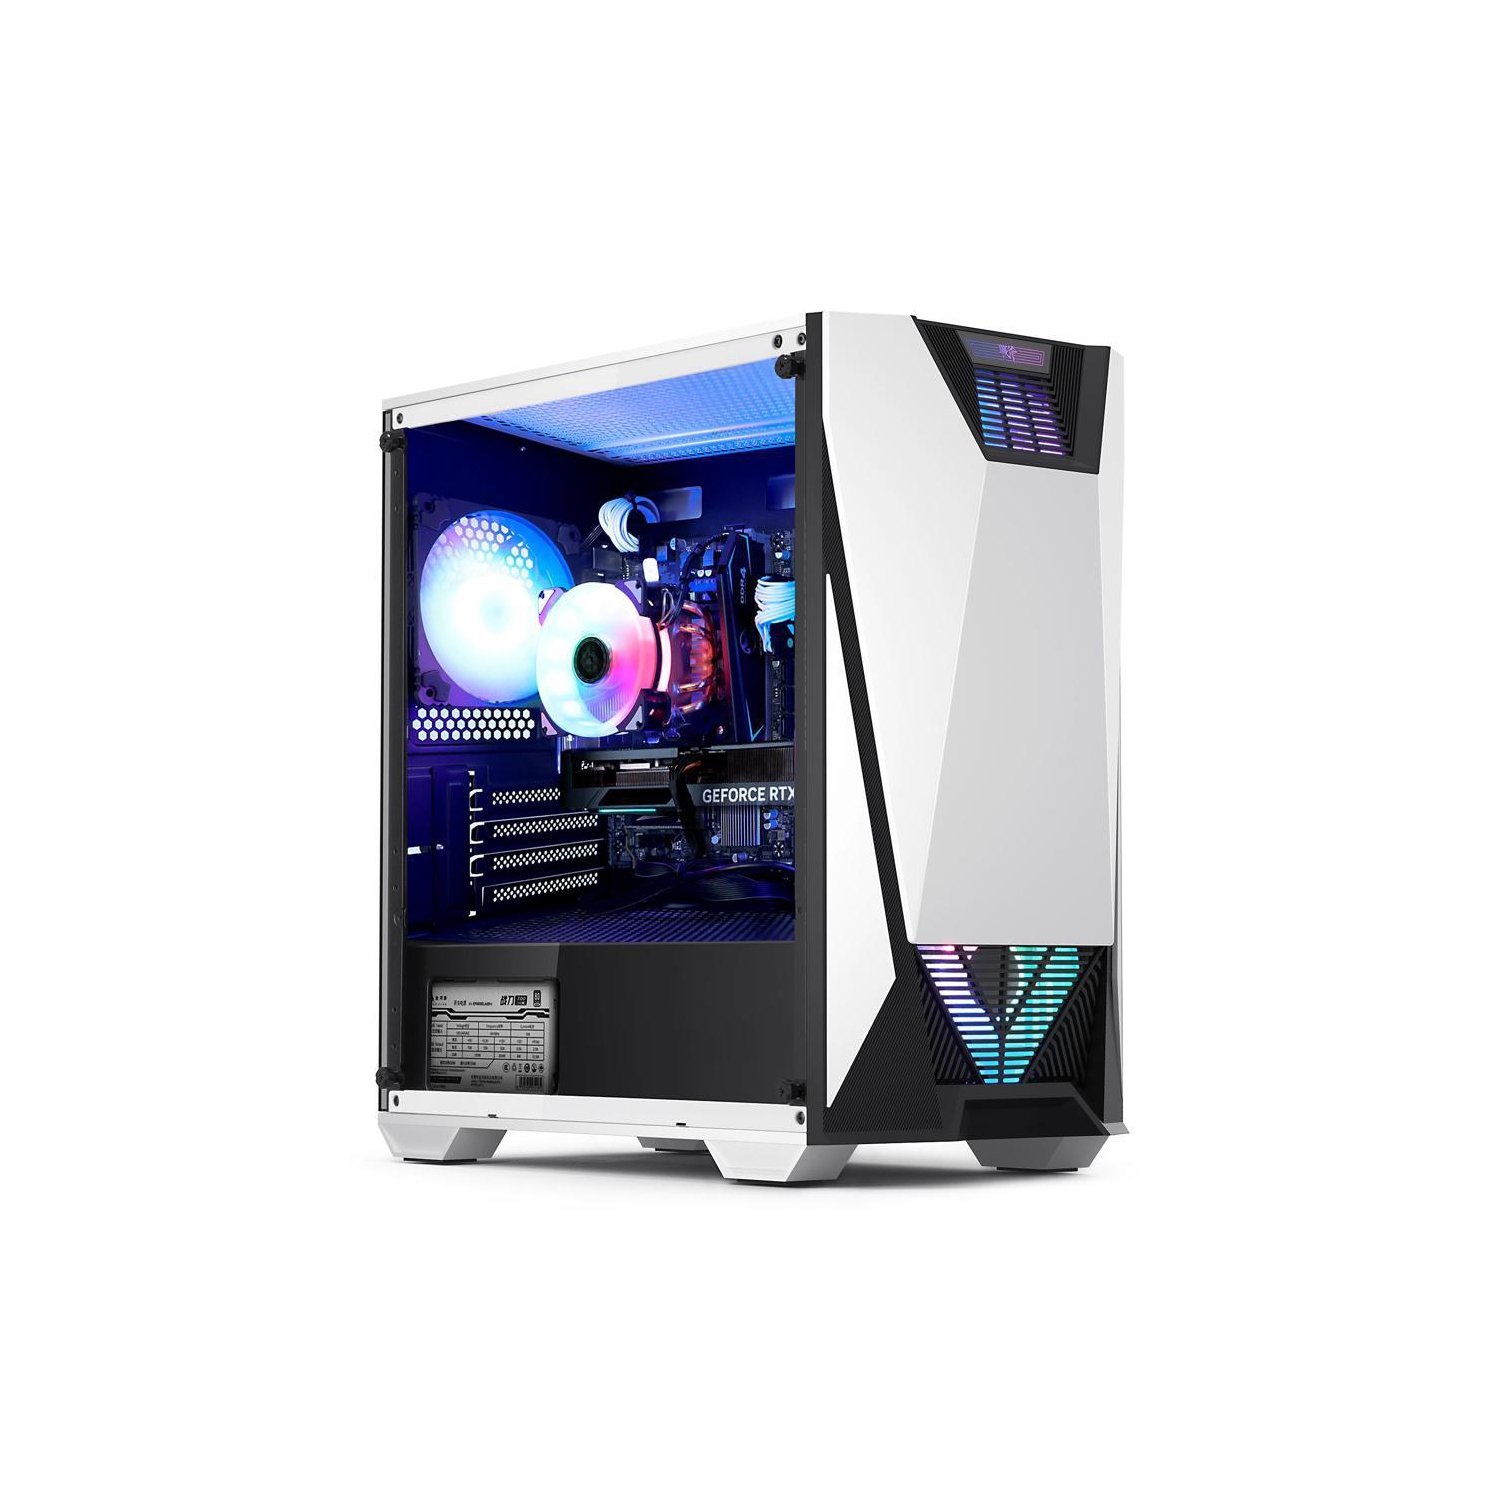 Hoengager Battleaxe Gaming - Intel Core i5-12600K 10-Core 3.7GHz-NVIDIA GeForce RTX 3060 - 32GB DDR4 3200MHz - 500GB M.2 NVMe SSD- WIFI -RGB Fans - Windows 11 Pro Computer